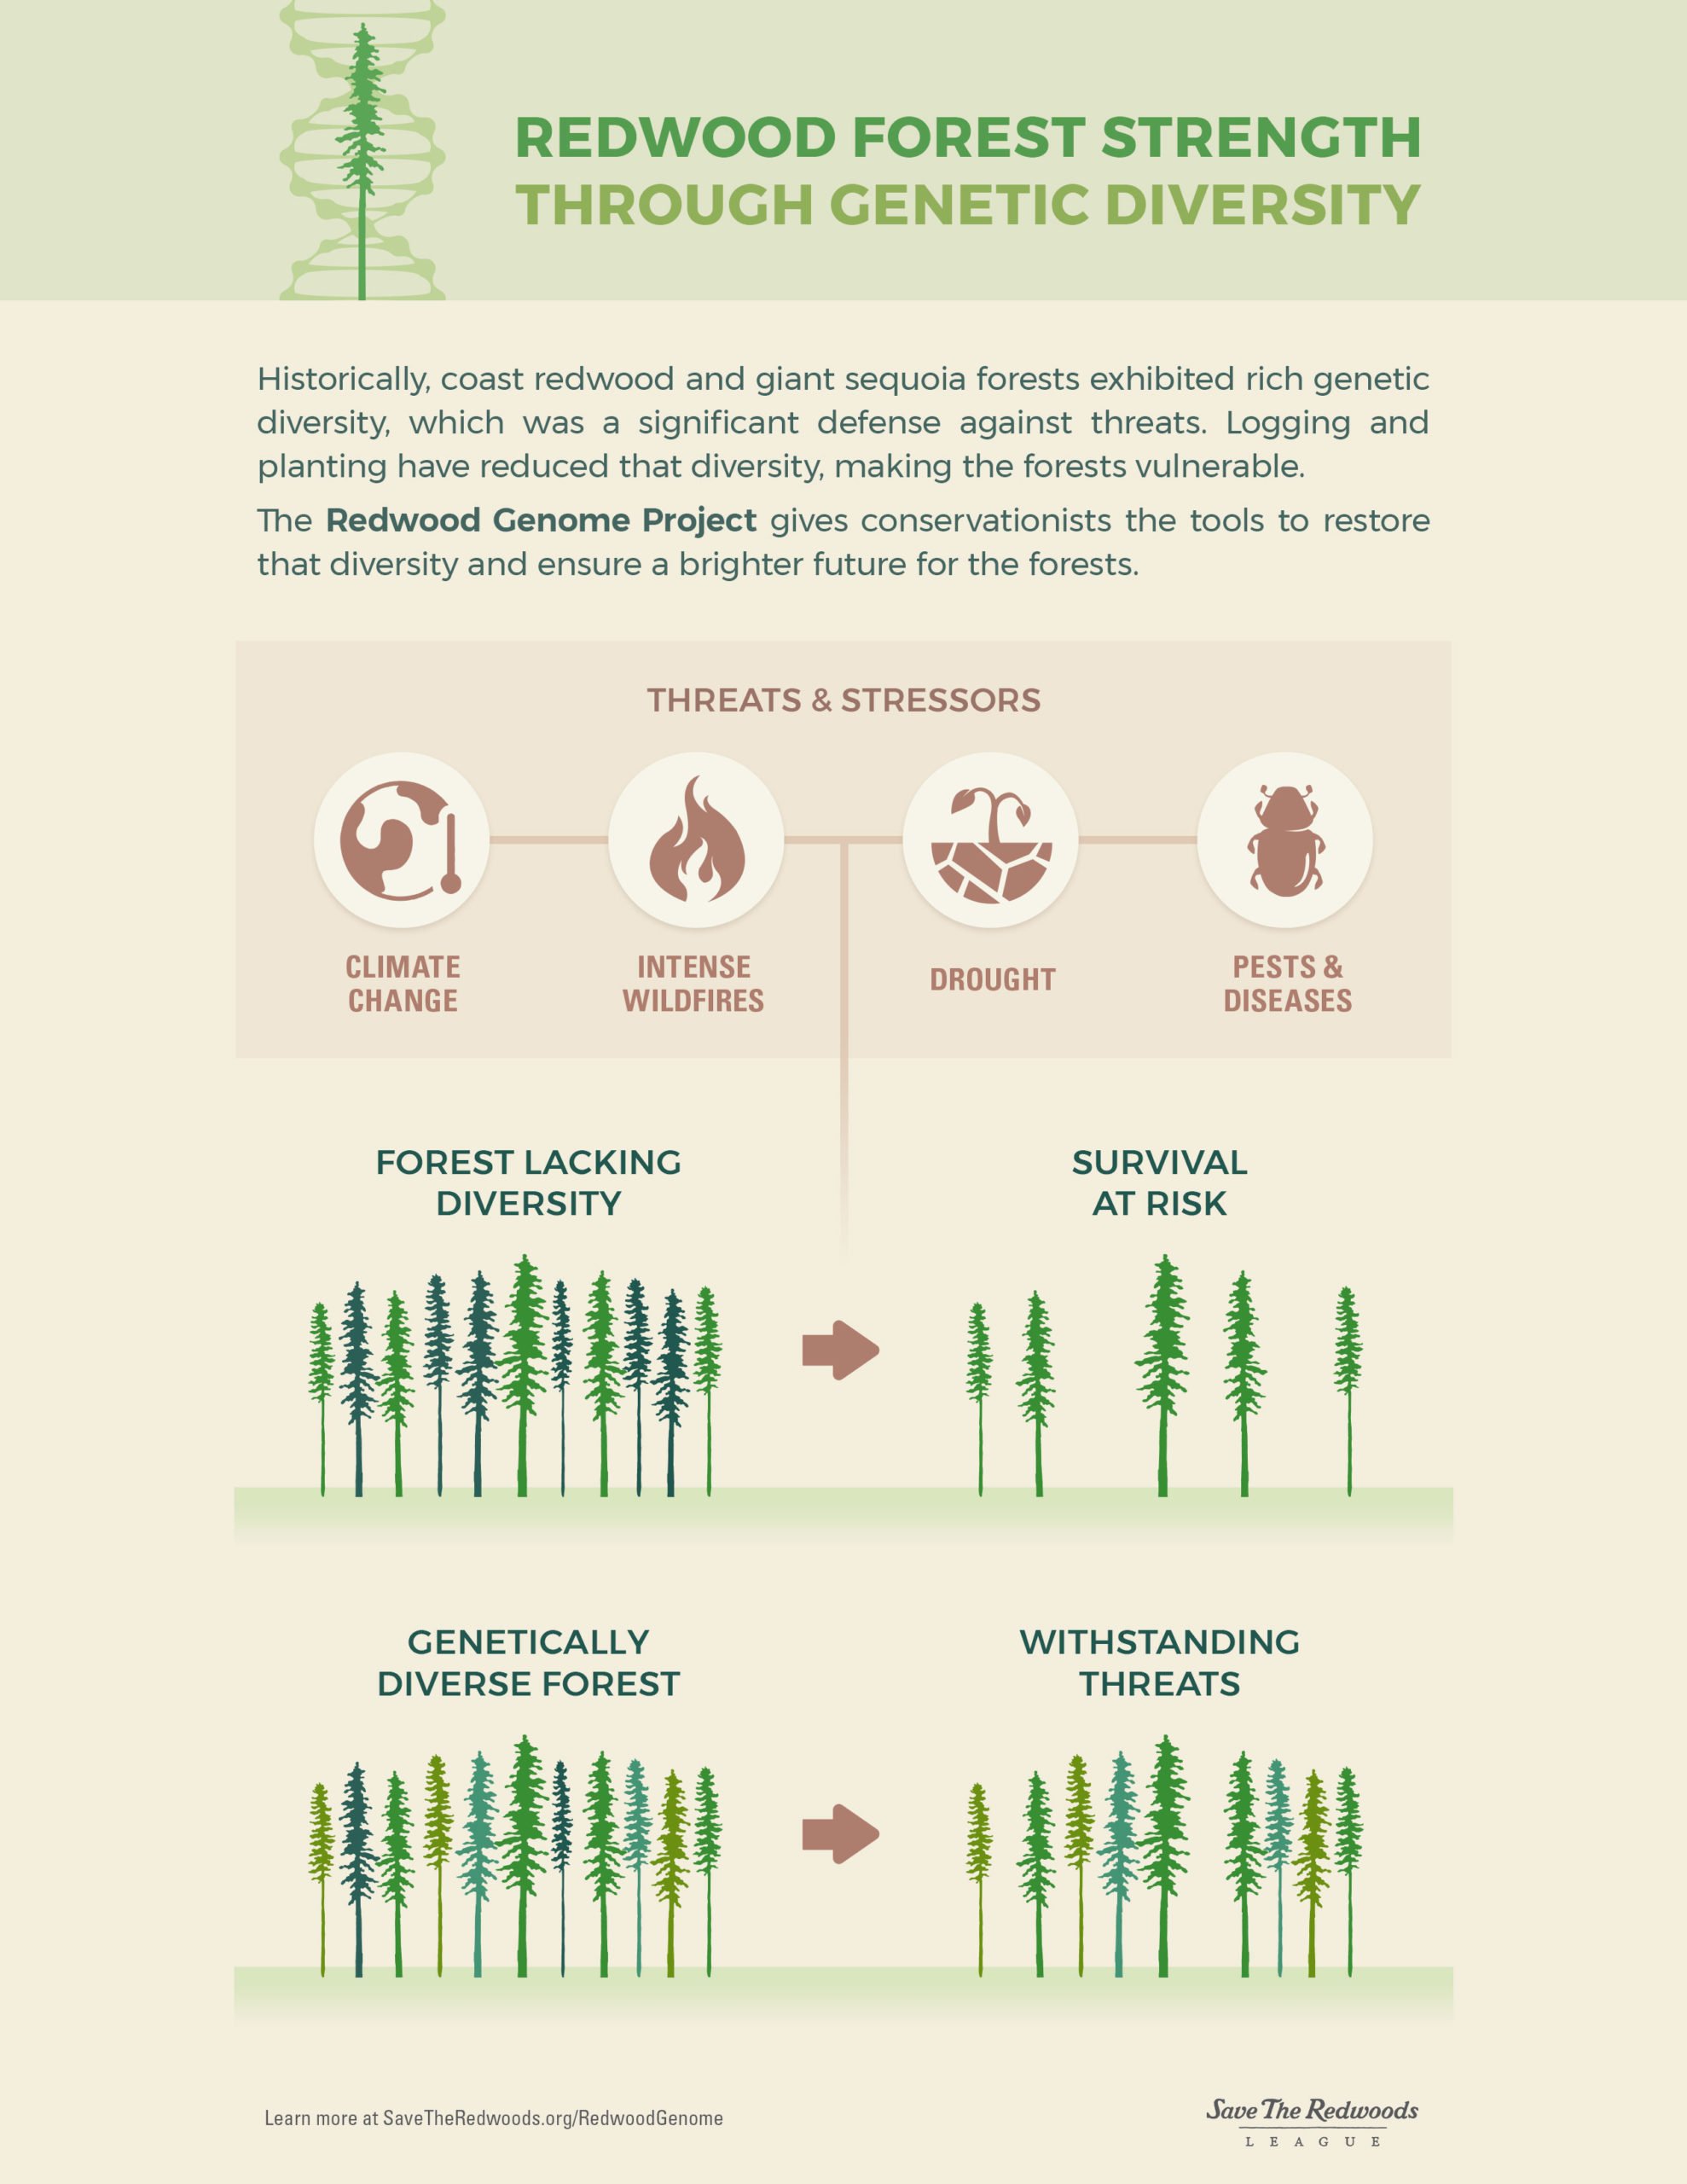 Benefits of a genetically diverse forest include increased defense against threats, resulting in a more resilient ecosystem.